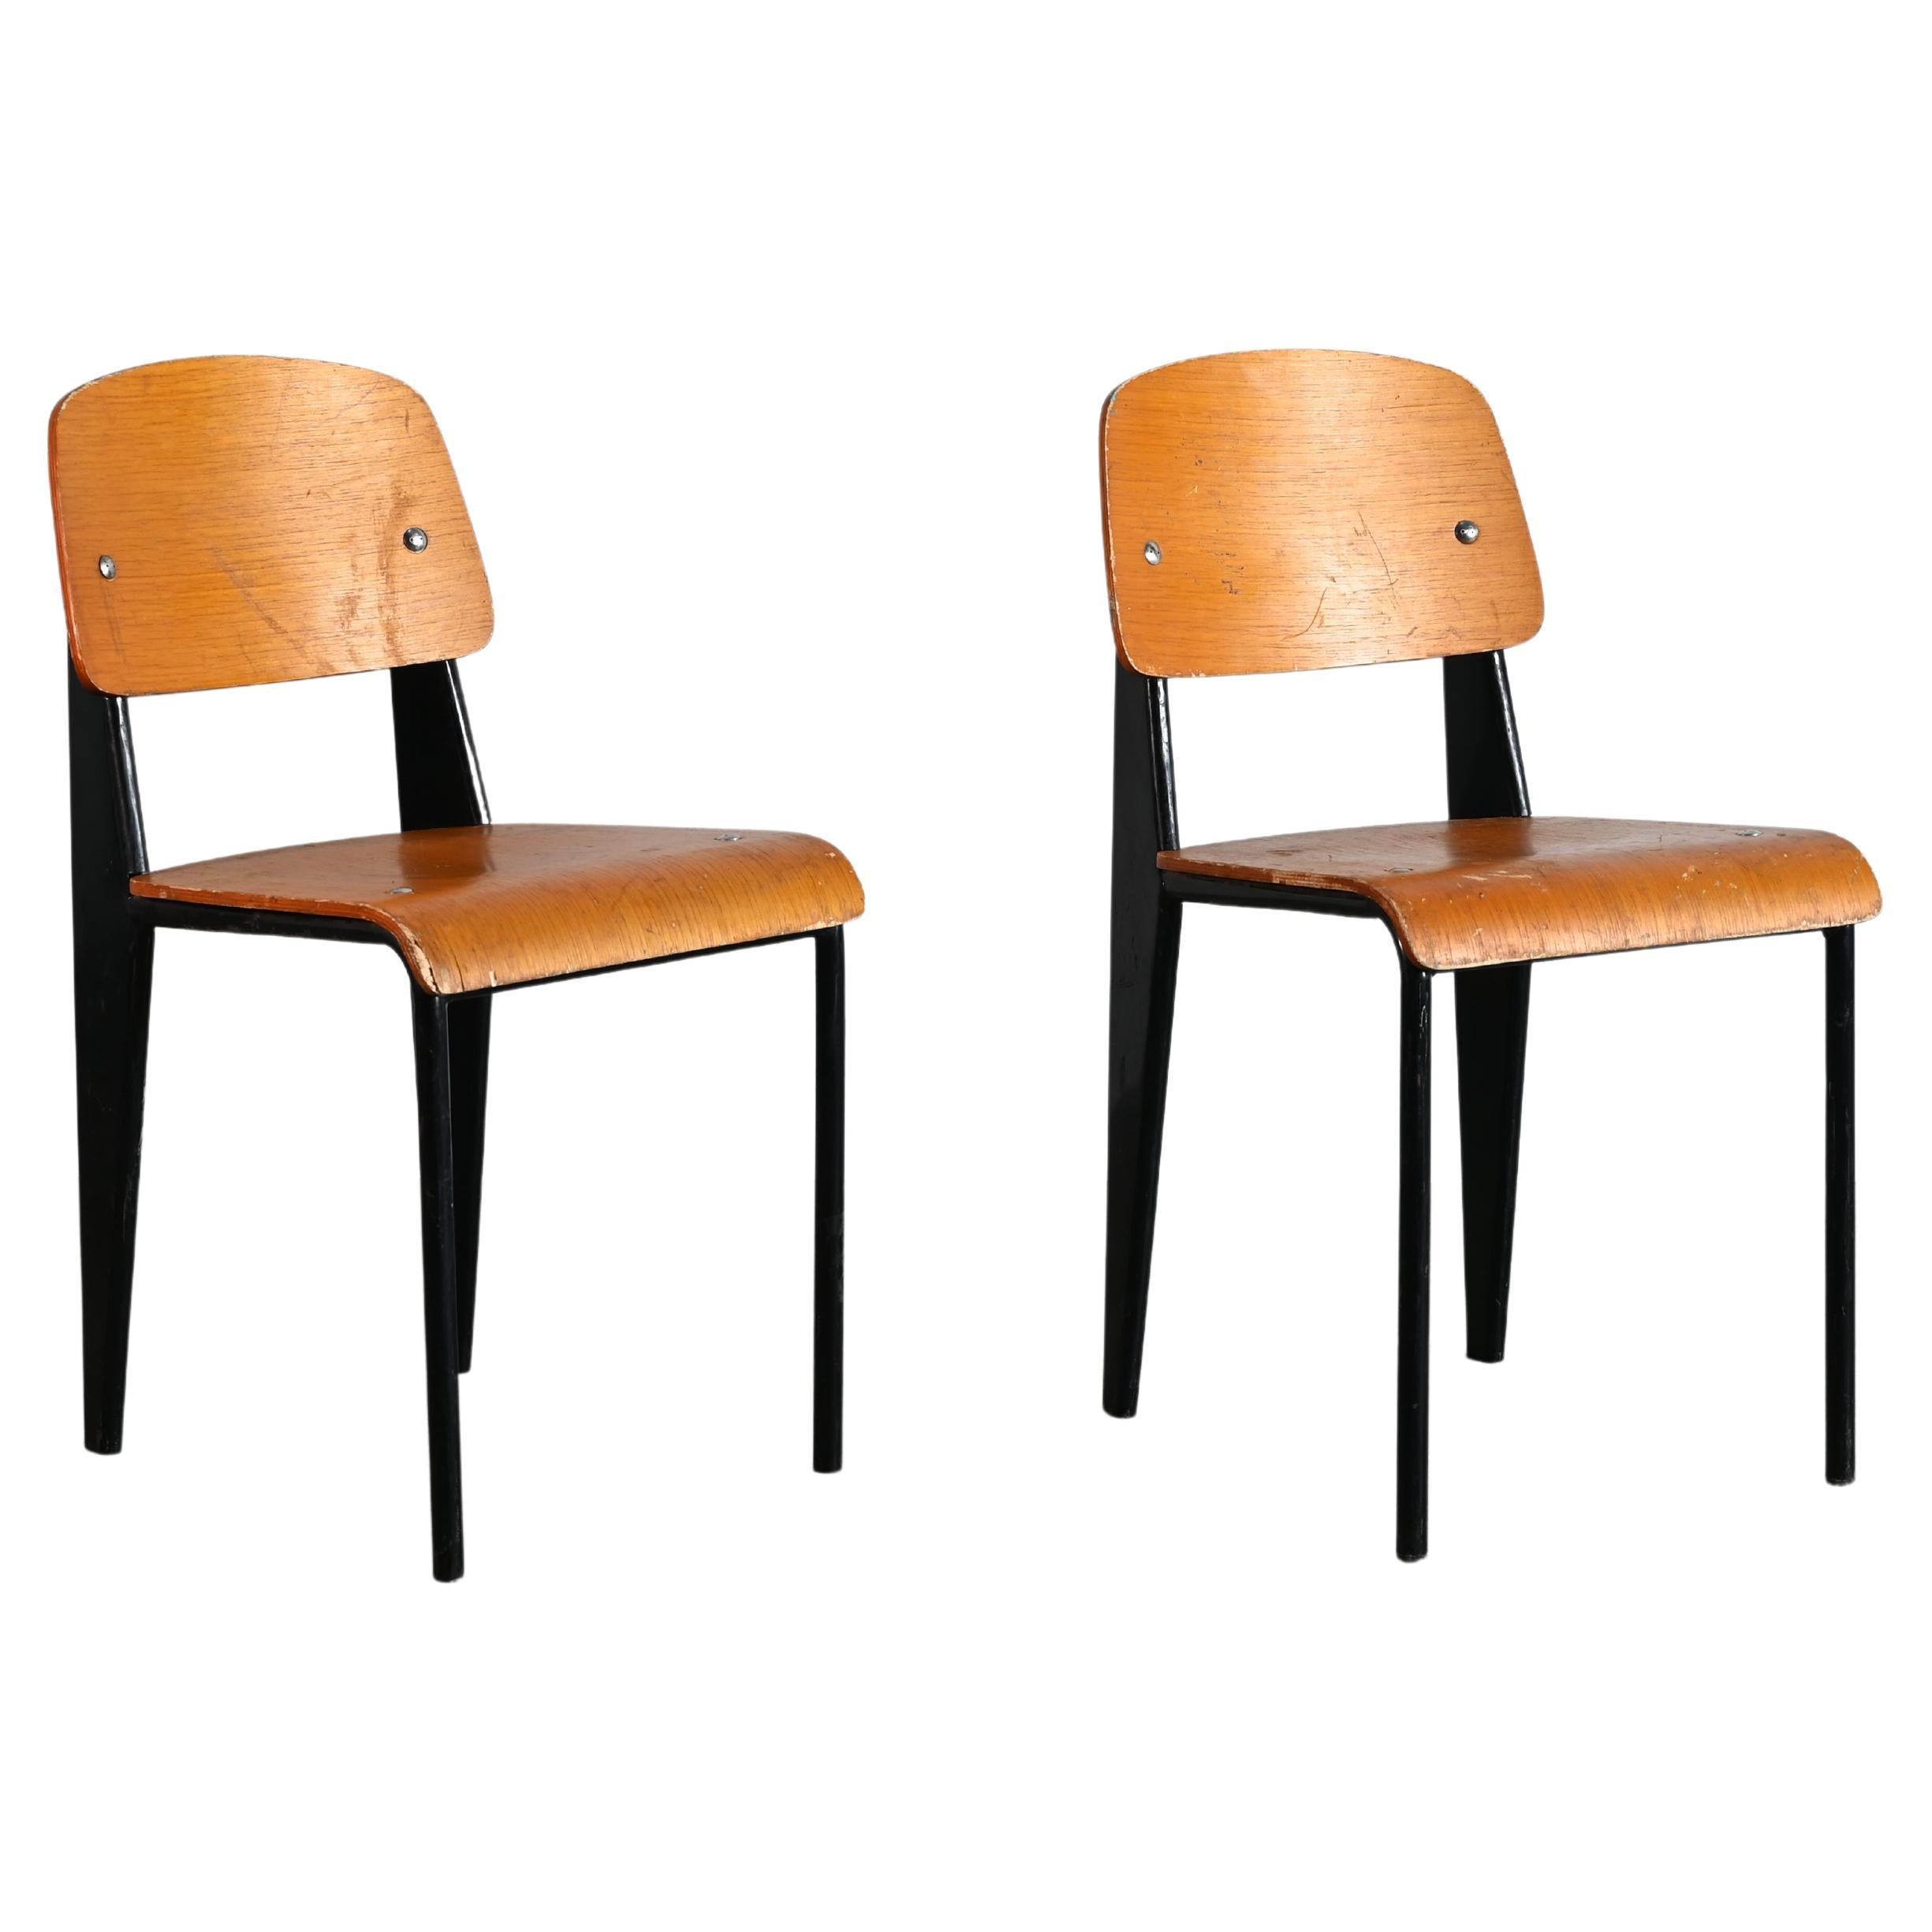 Jean Prouvé Pair of "Standard Chairs" / Authentic Mid-Century Modern